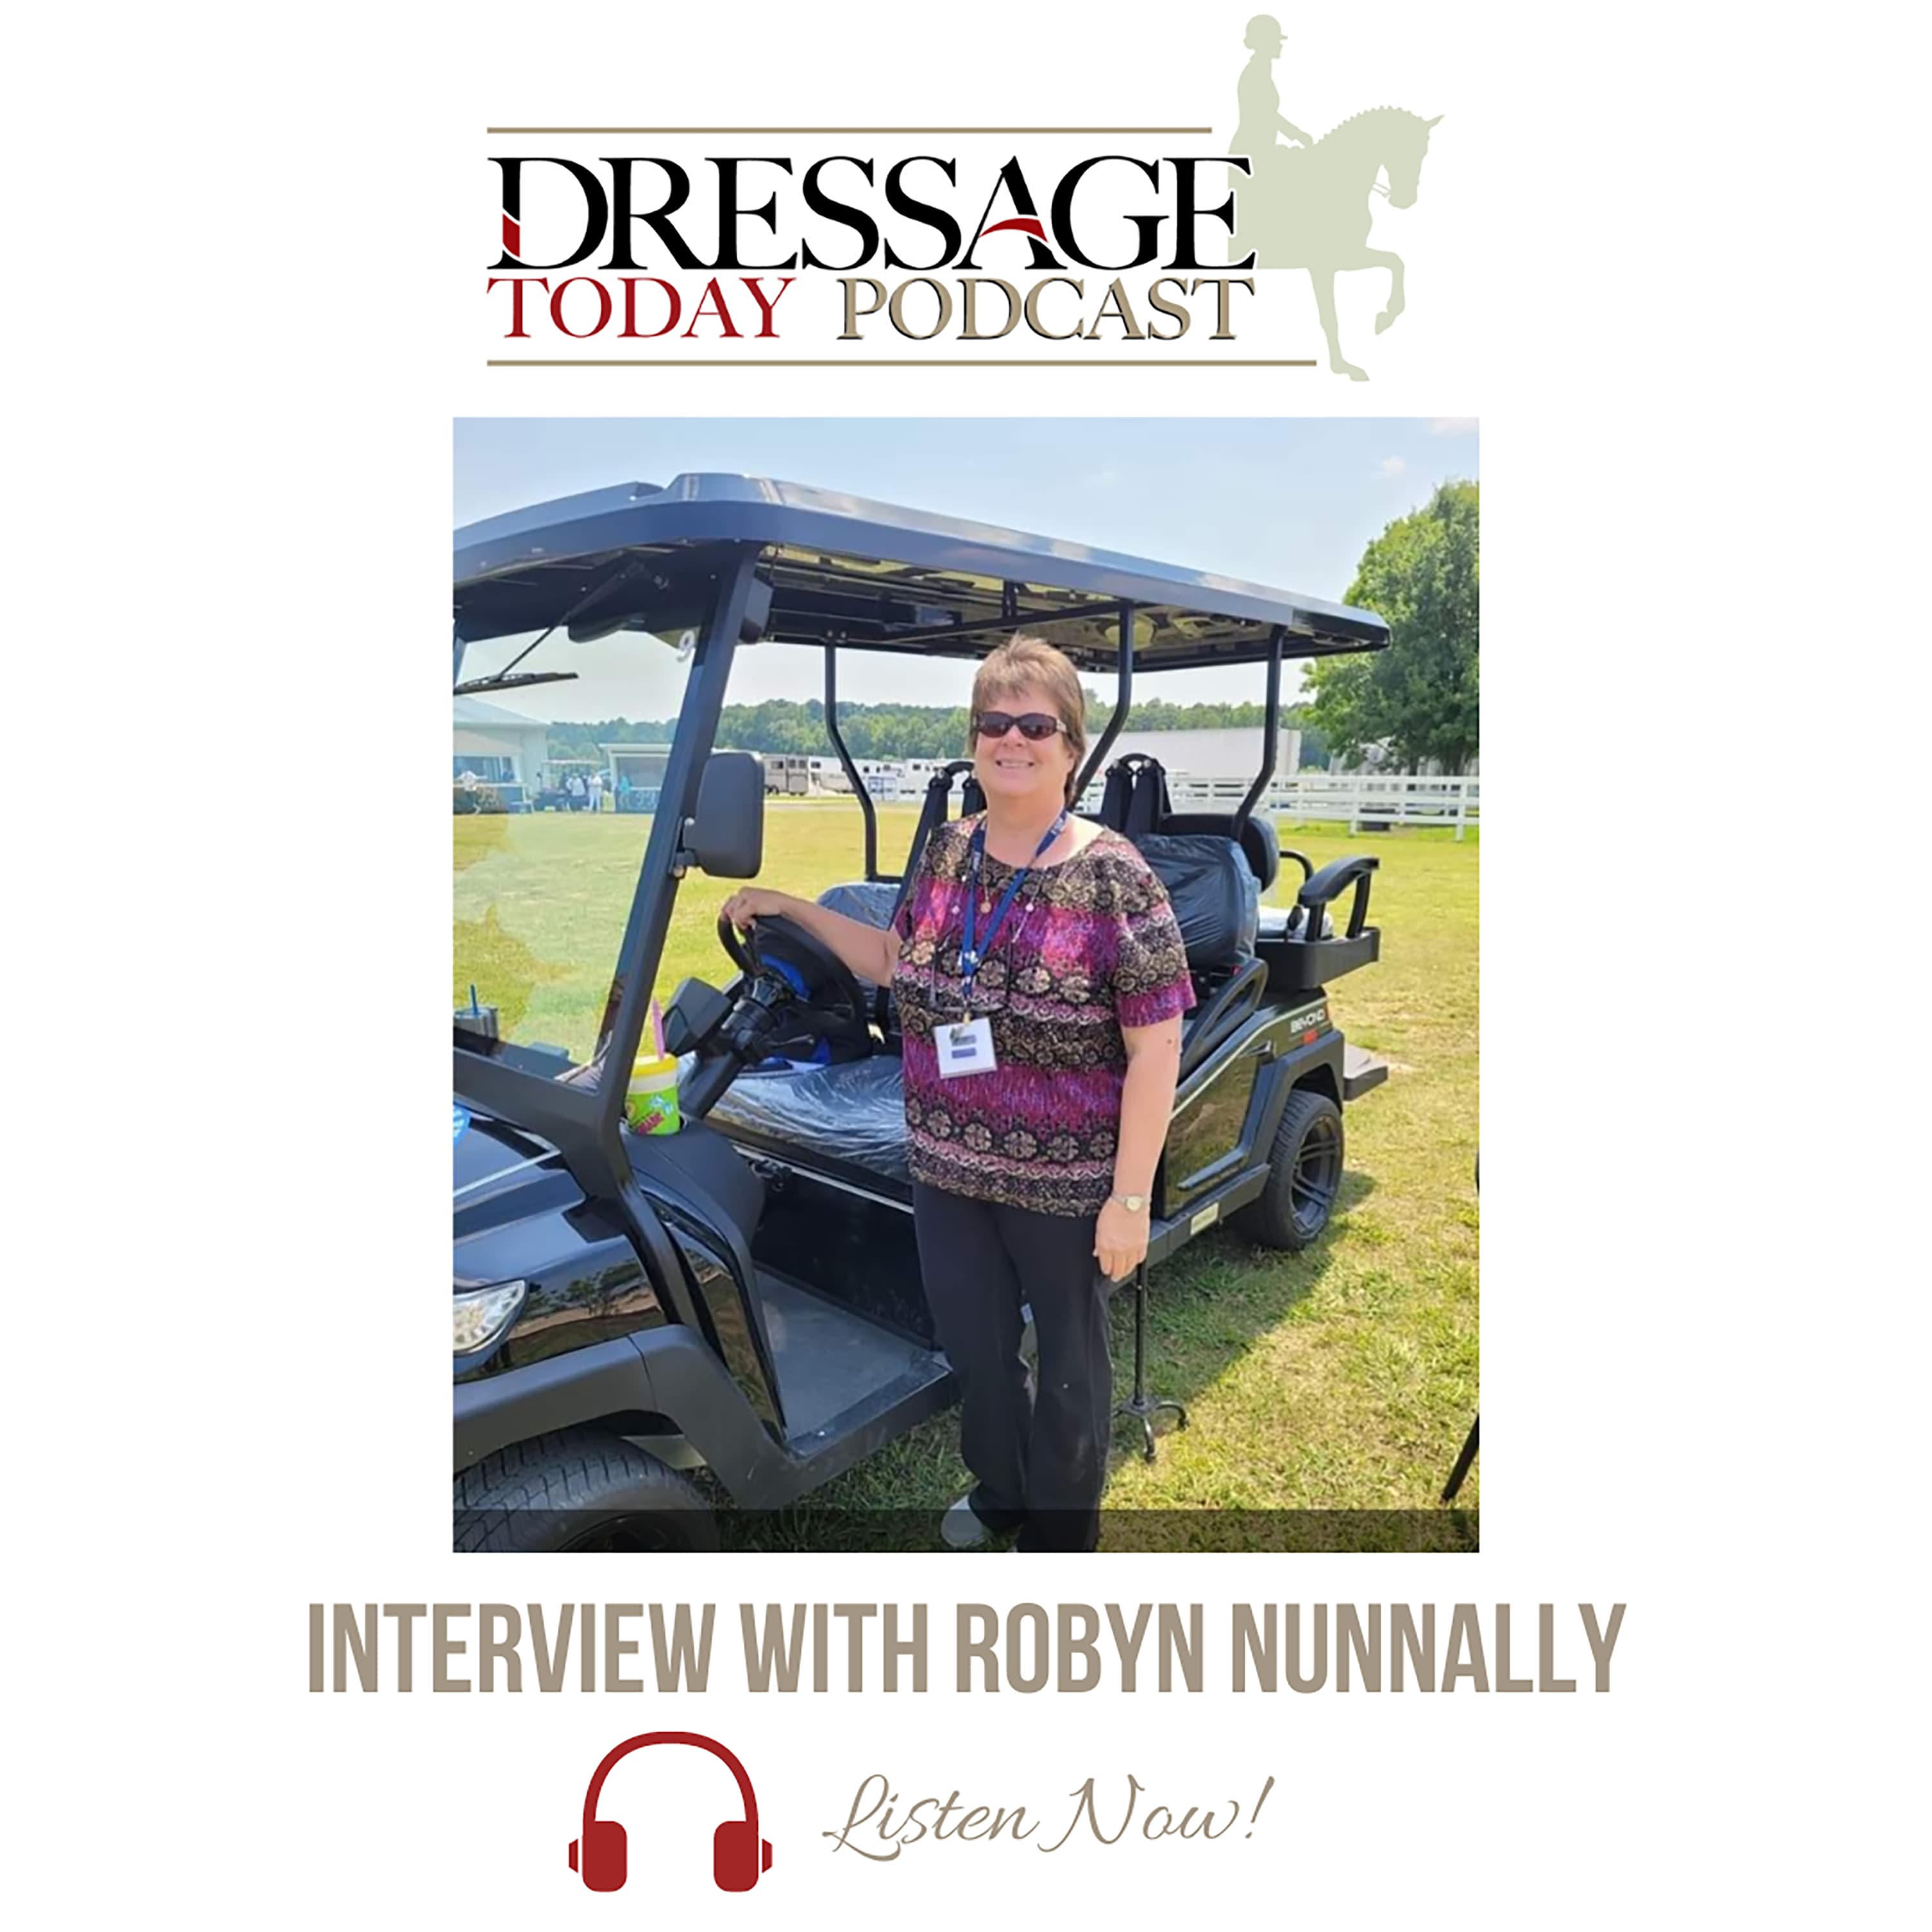 Interview with Robyn Nunnally – Dressage Today Podcast